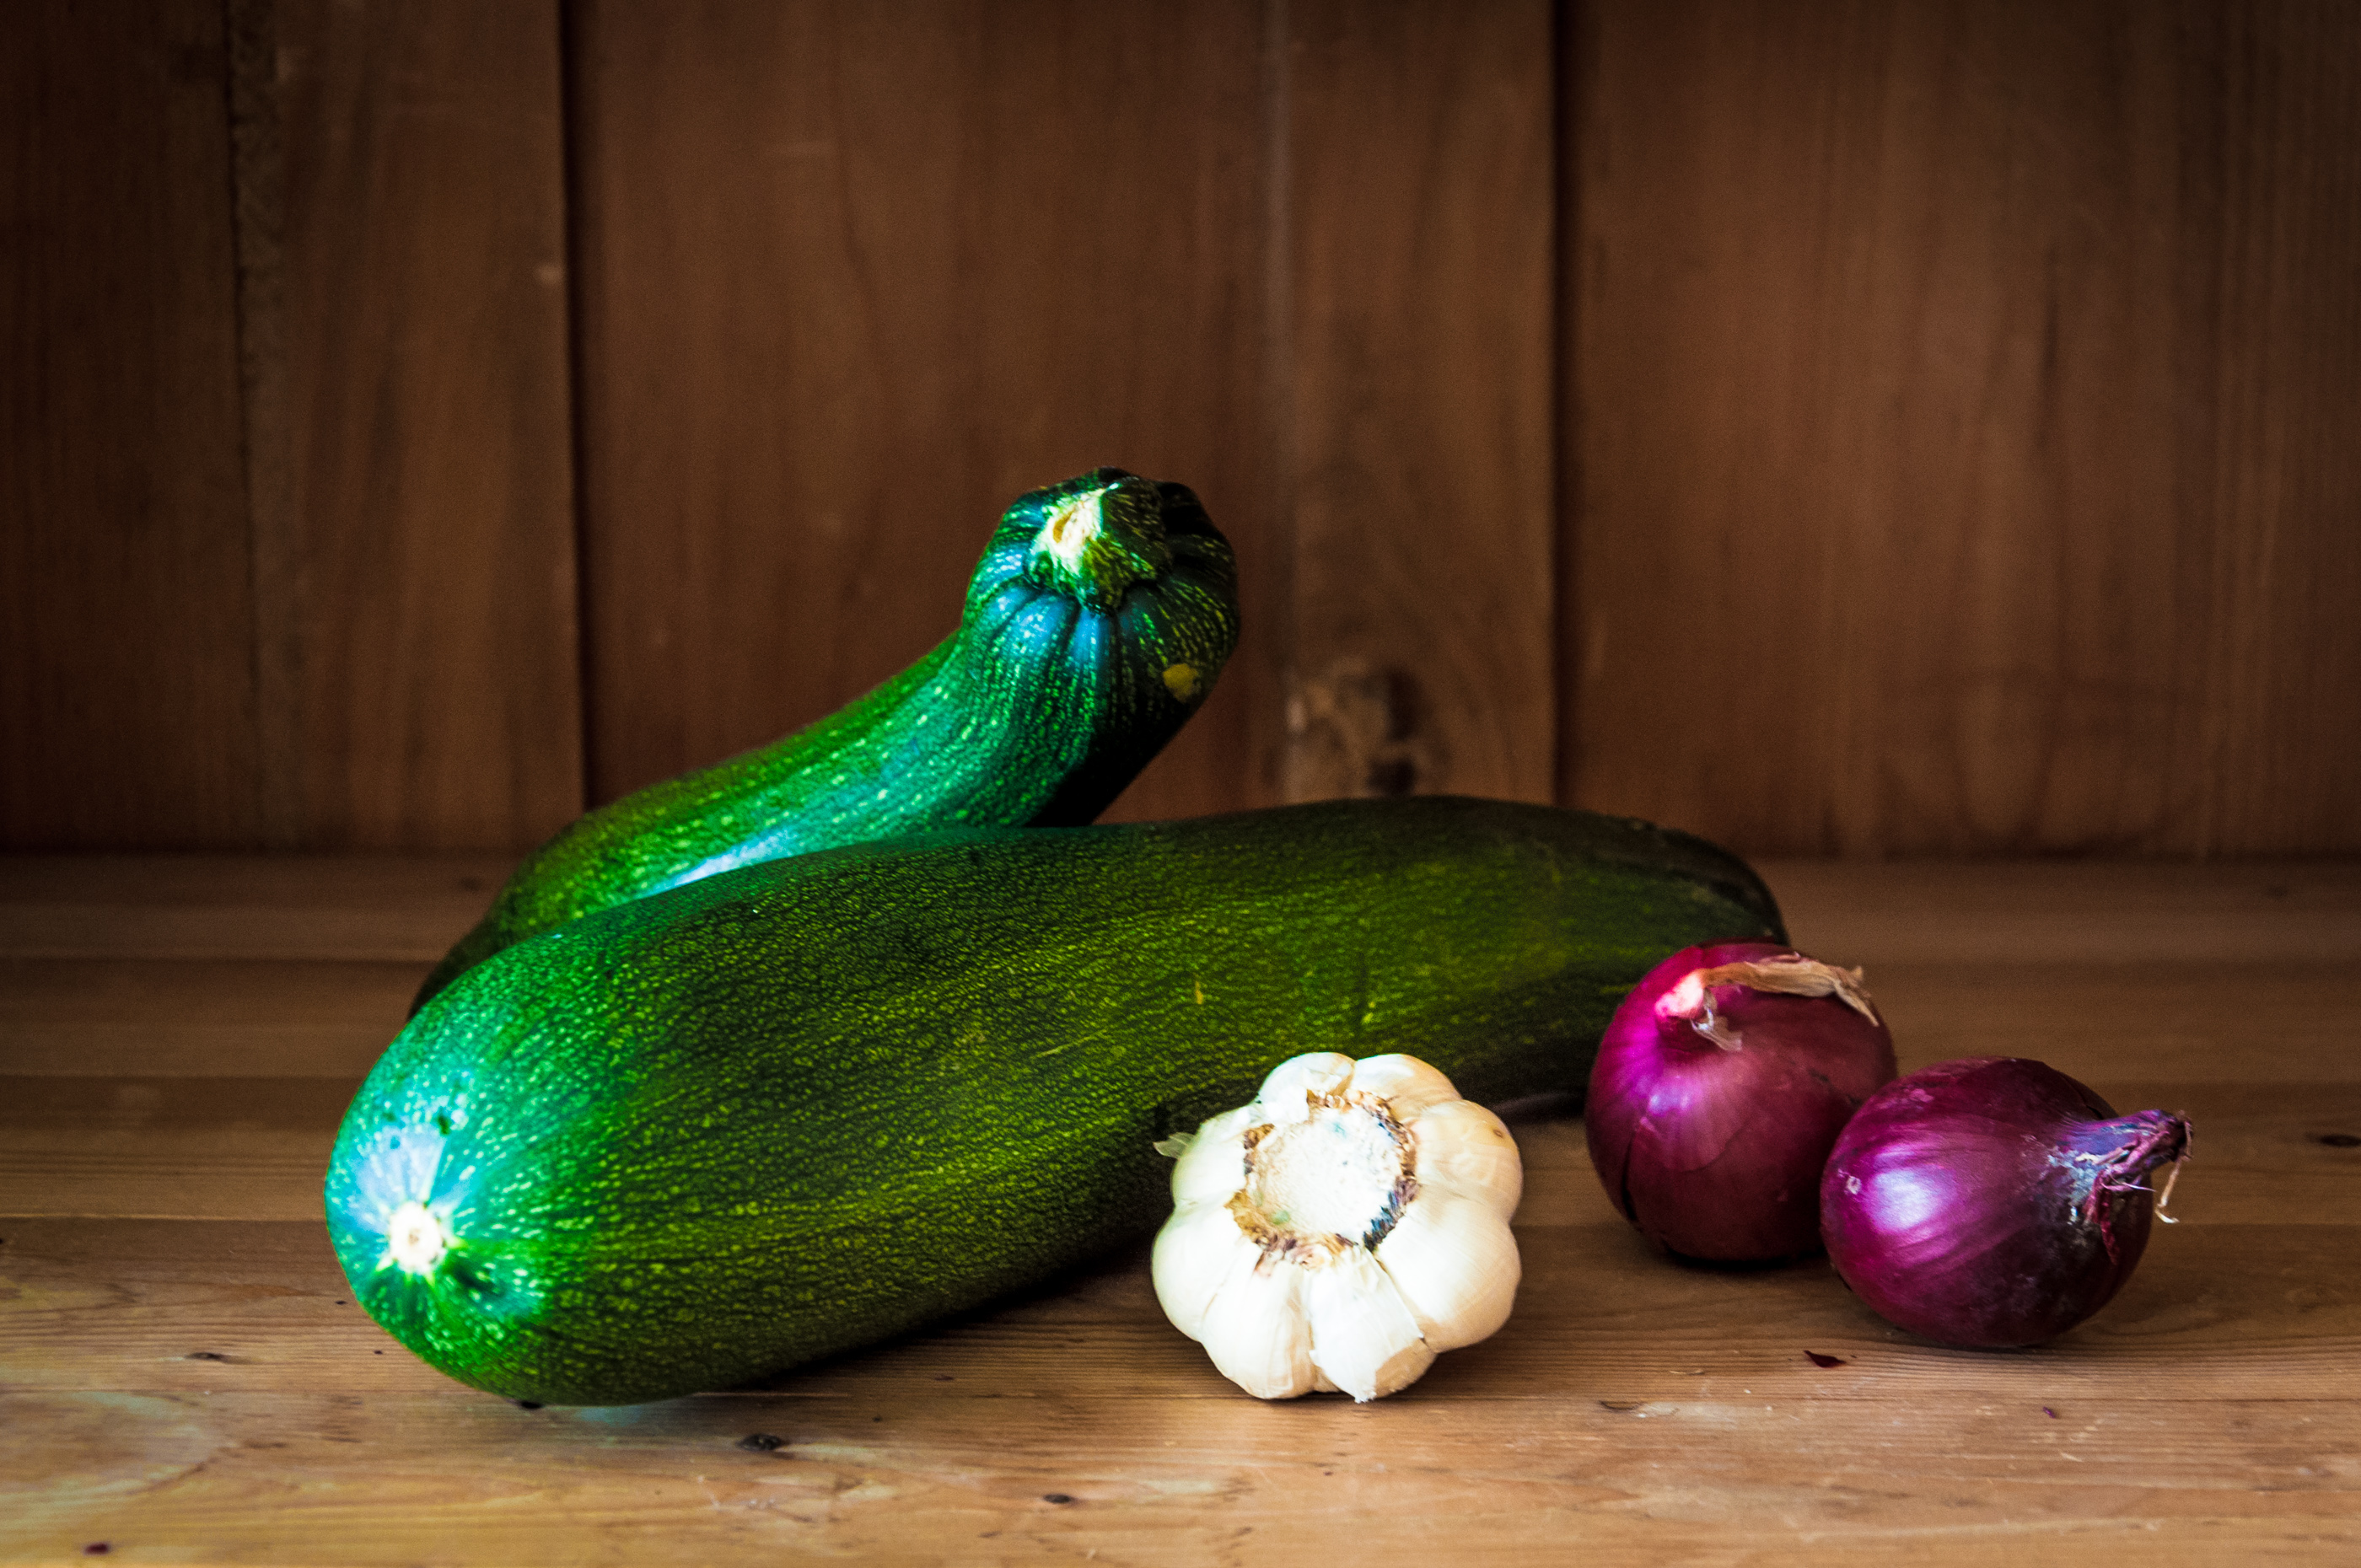 Courgette on wood background photo